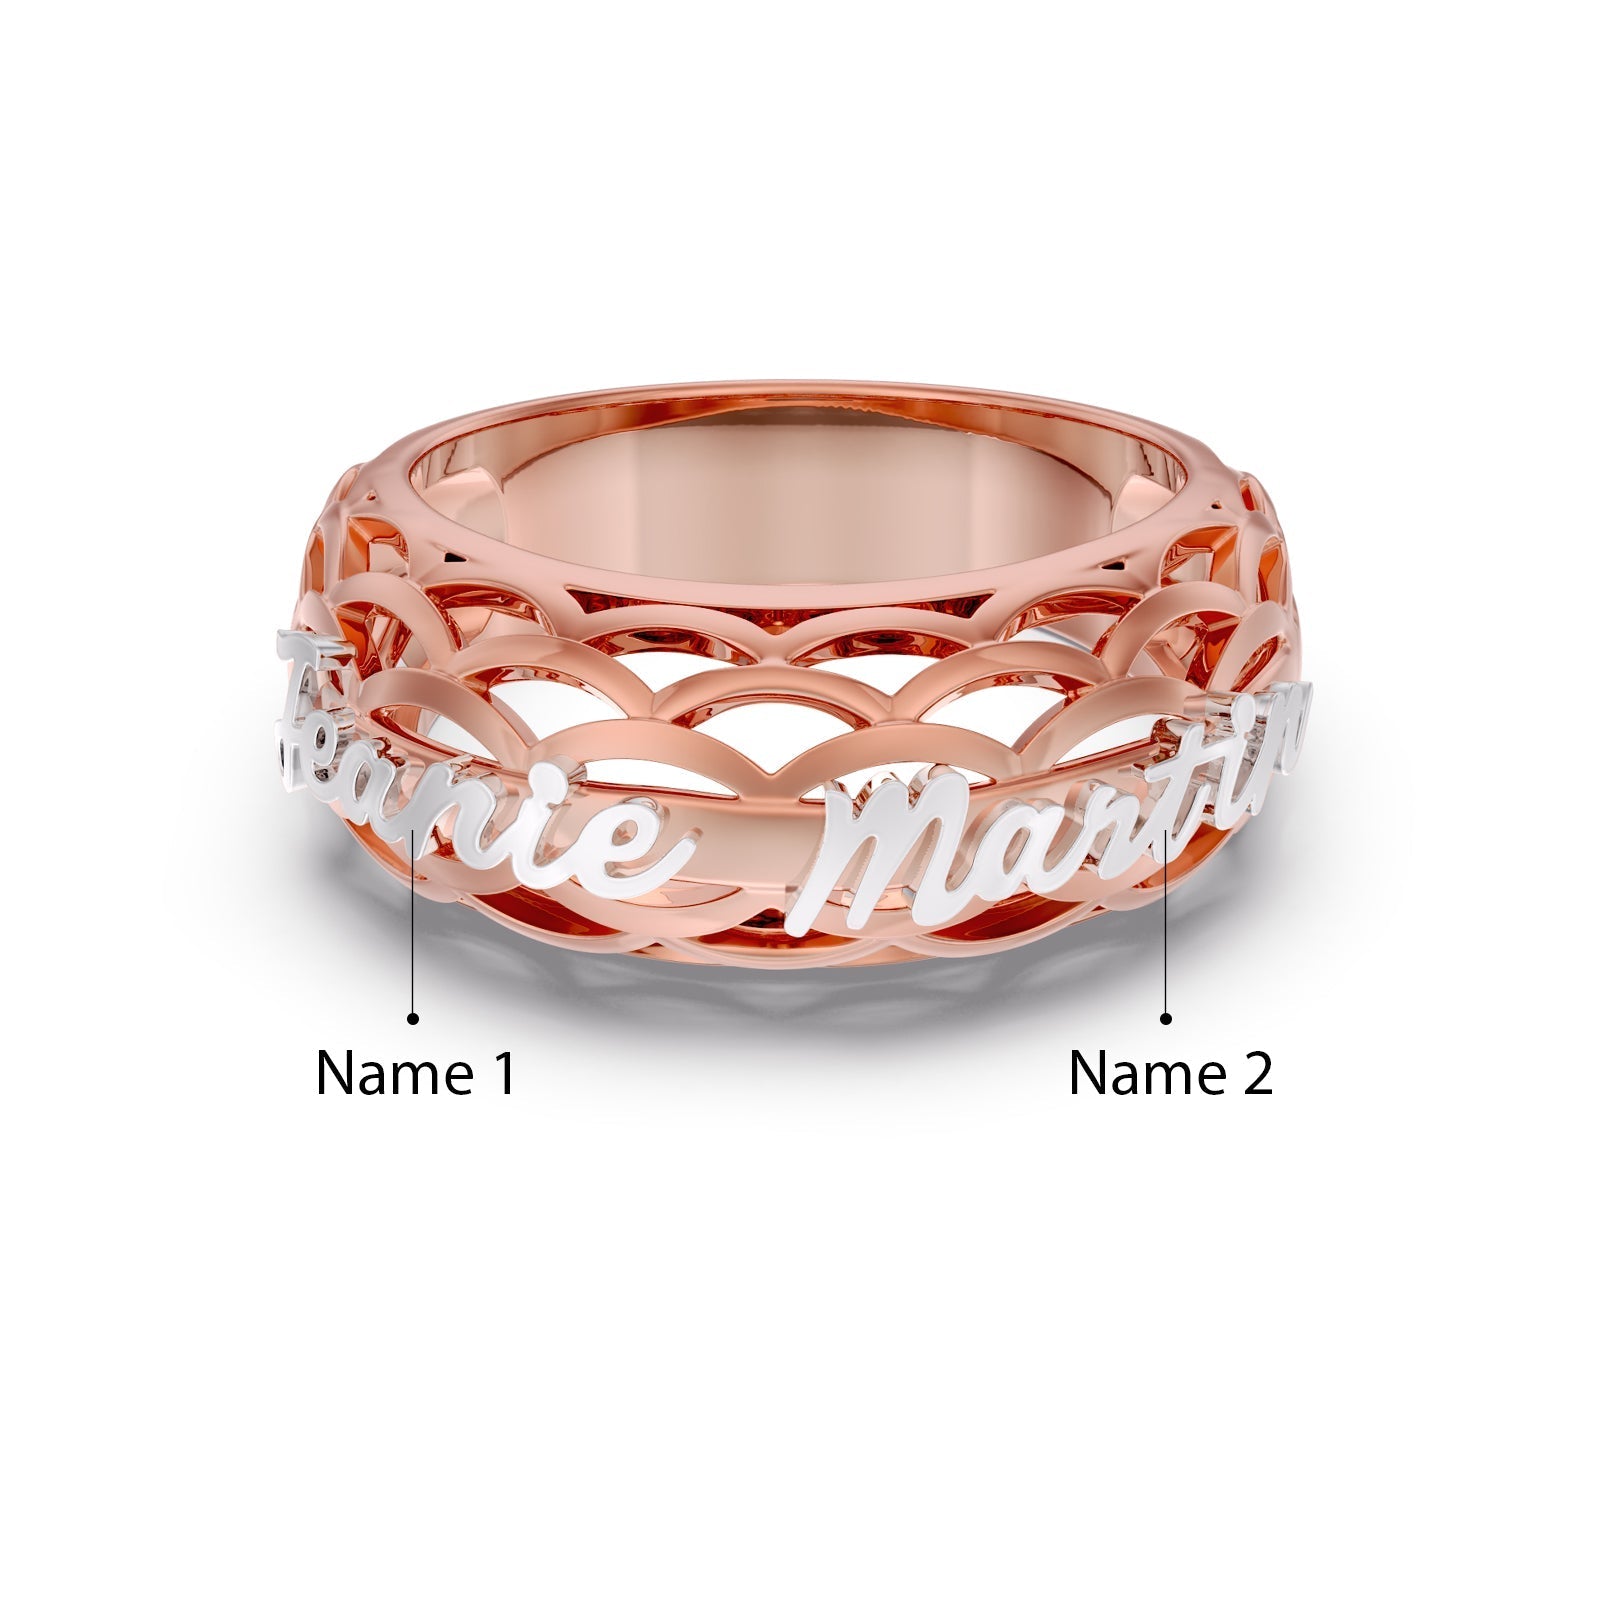 ThinkEngraved Father's Ring 4 / 14k rose gold and sterling silver Personalized Father's Dad Ring 2 Cut-Out Kids Name